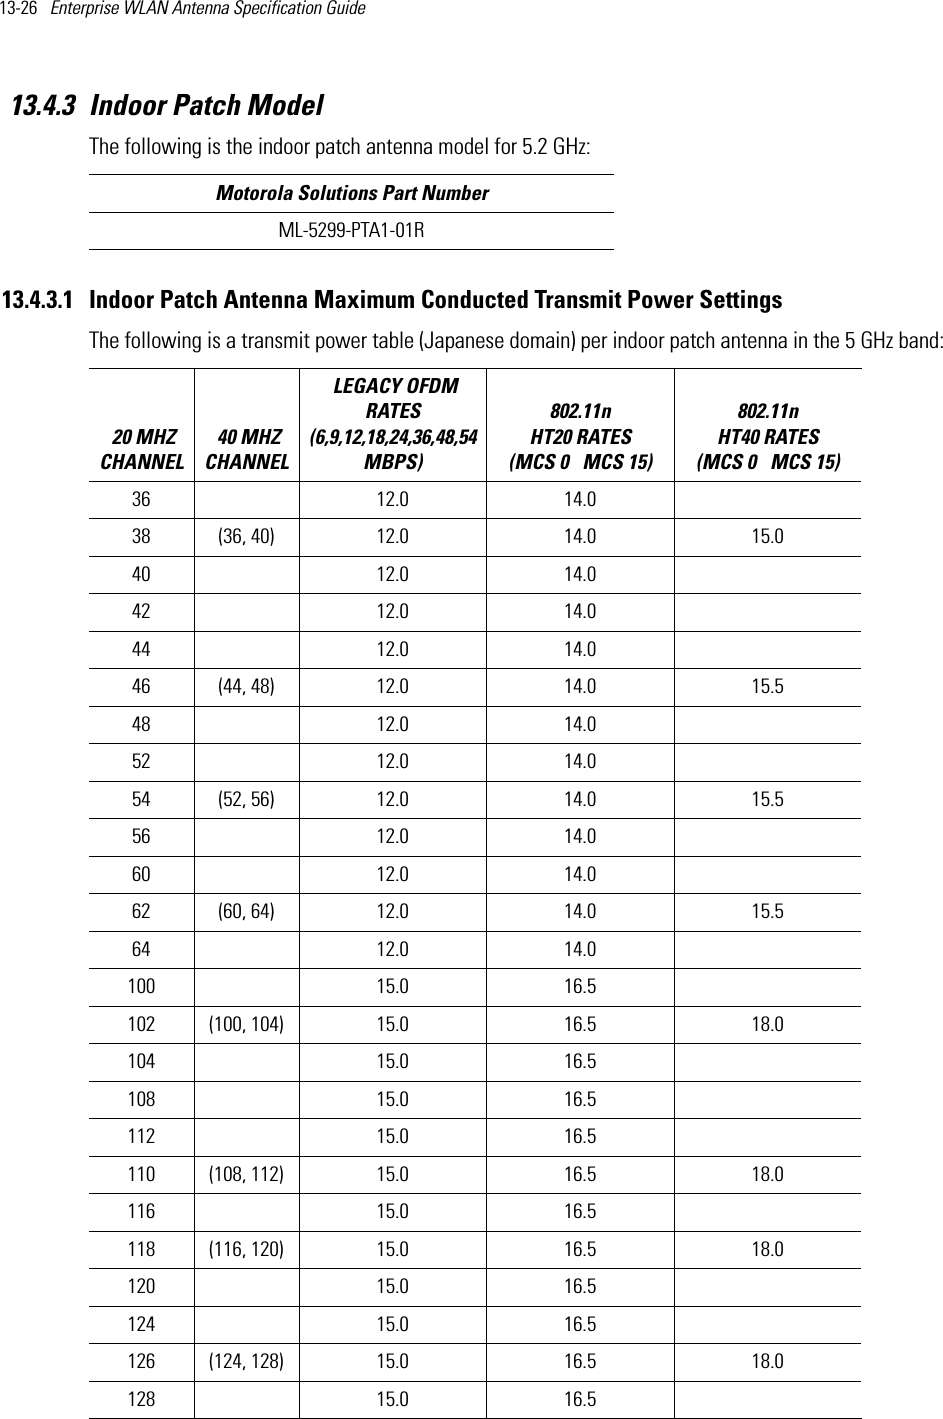 13-26   Enterprise WLAN Antenna Specification Guide 13.4.3 Indoor Patch ModelThe following is the indoor patch antenna model for 5.2 GHz:13.4.3.1 Indoor Patch Antenna Maximum Conducted Transmit Power SettingsThe following is a transmit power table (Japanese domain) per indoor patch antenna in the 5 GHz band:  Motorola Solutions Part NumberML-5299-PTA1-01R 20 MHZ CHANNEL 40 MHZ CHANNEL LEGACY OFDM RATES (6,9,12,18,24,36,48,54 MBPS) 802.11n HT20 RATES (MCS 0   MCS 15)802.11n HT40 RATES (MCS 0   MCS 15) 36  12.0 14.0  38 (36, 40) 12.0 14.0 15.040  12.0 14.0  42  12.0 14.0  44  12.0 14.0  46 (44, 48) 12.0 14.0 15.548  12.0 14.0  52  12.0 14.0  54 (52, 56) 12.0 14.0 15.556  12.0 14.0  60  12.0 14.0  62 (60, 64) 12.0 14.0 15.564  12.0 14.0  100  15.0 16.5  102 (100, 104) 15.0 16.5 18.0104  15.0 16.5  108  15.0 16.5  112  15.0 16.5  110 (108, 112) 15.0 16.5 18.0116  15.0 16.5  118 (116, 120) 15.0 16.5 18.0120  15.0 16.5  124  15.0 16.5  126 (124, 128) 15.0 16.5 18.0128  15.0 16.5  